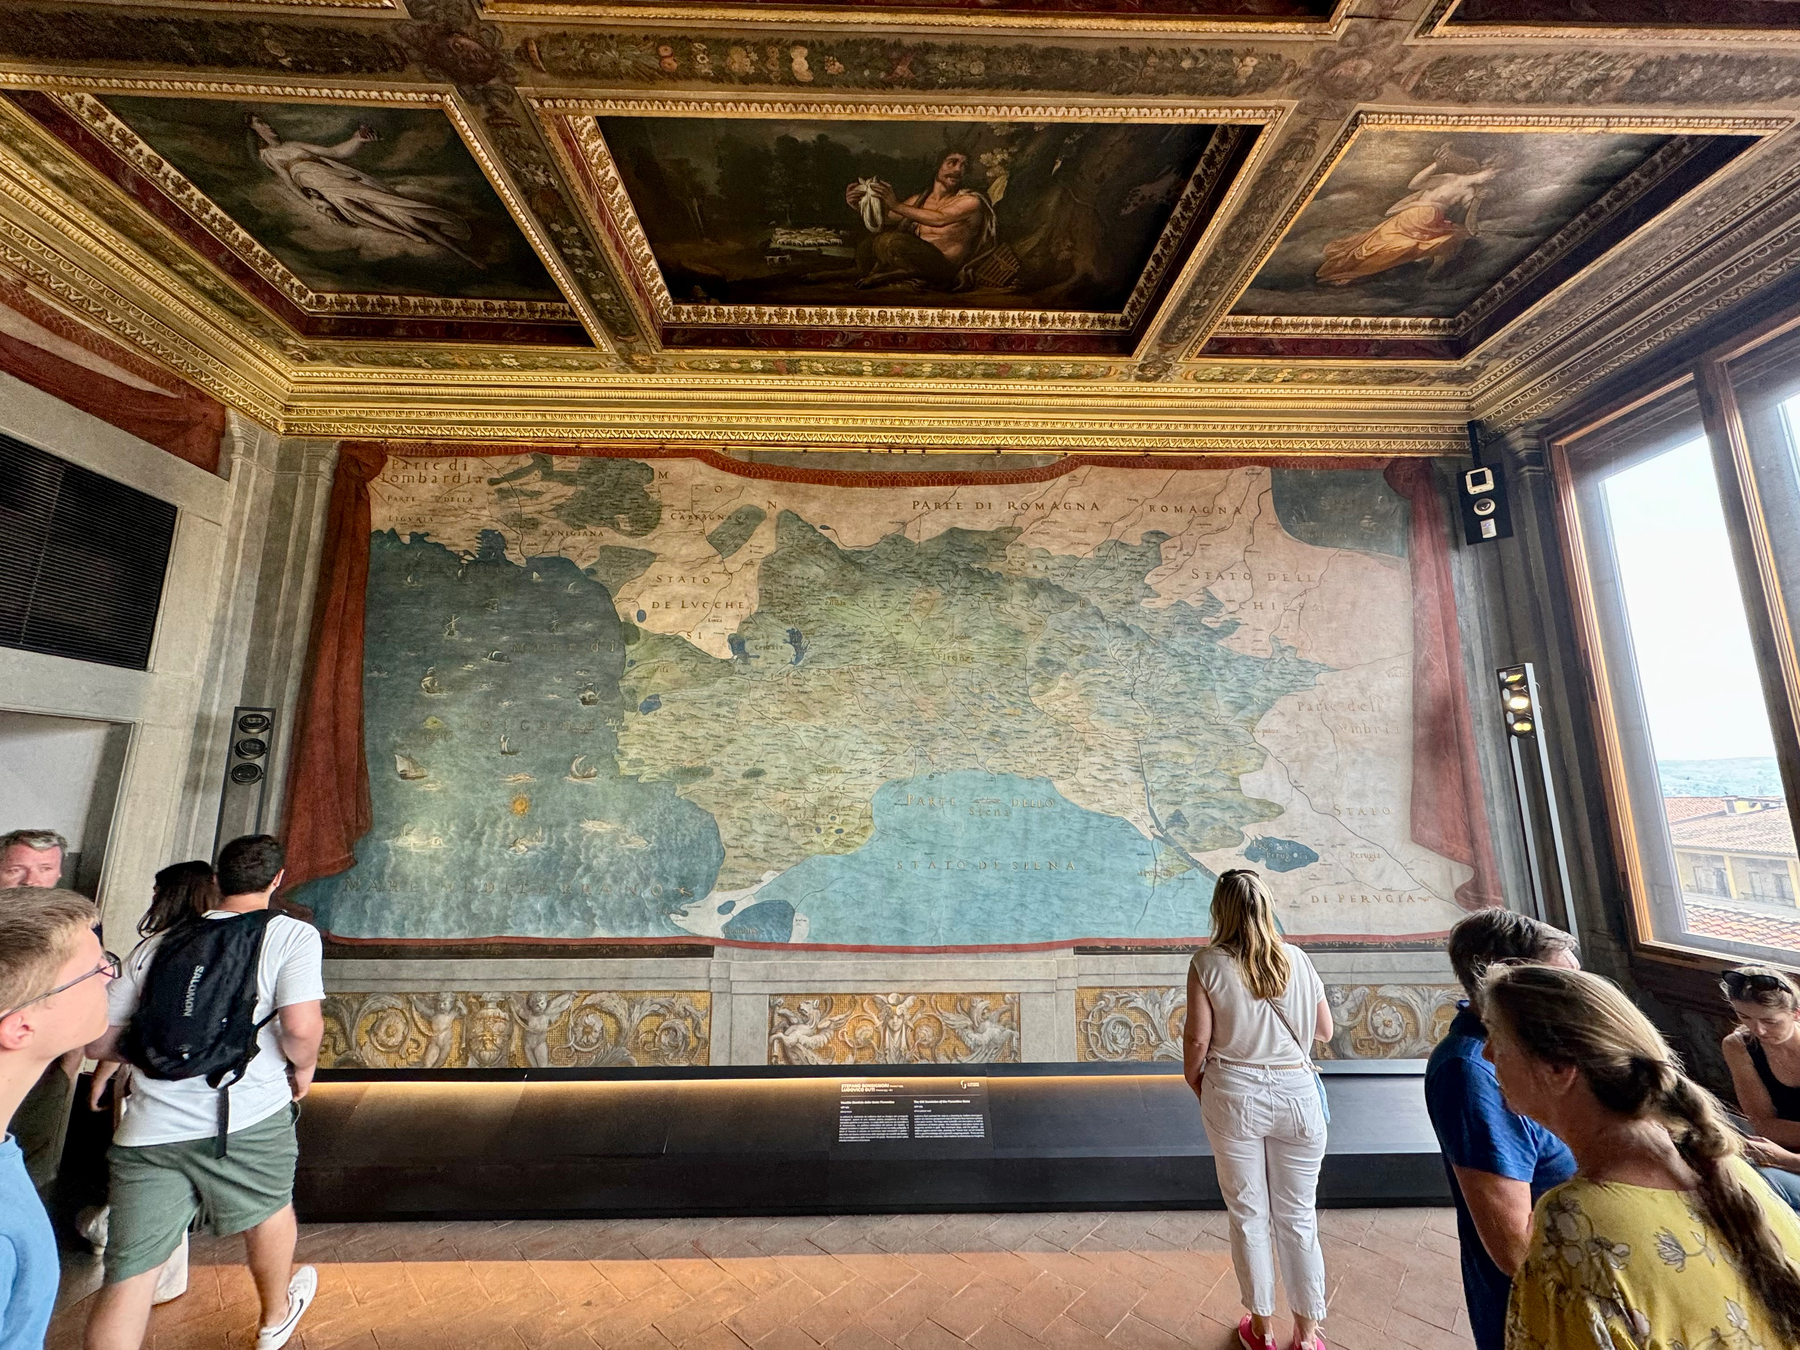 A group of people is viewing a large, historic map of Italy displayed on a wall in a room with ornate gold-trimmed ceilings and detailed paintings. Natural light pours in from a window on the right side of the image.